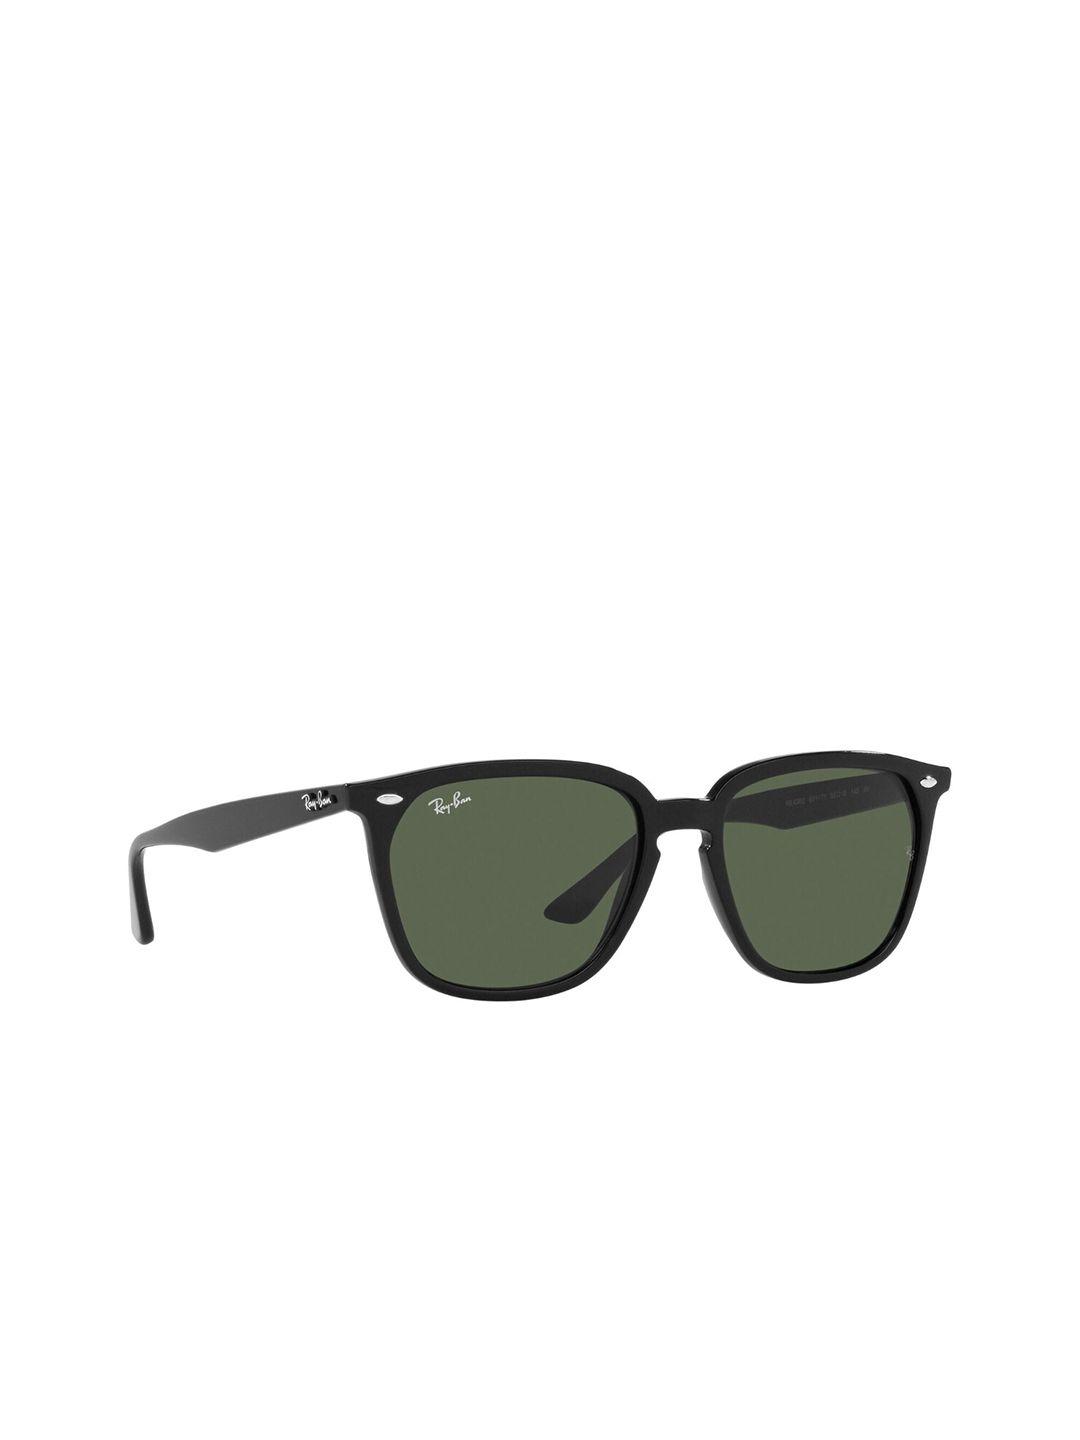 ray-ban unisex green lens & black square sunglasses with uv protected lens 8056597518949